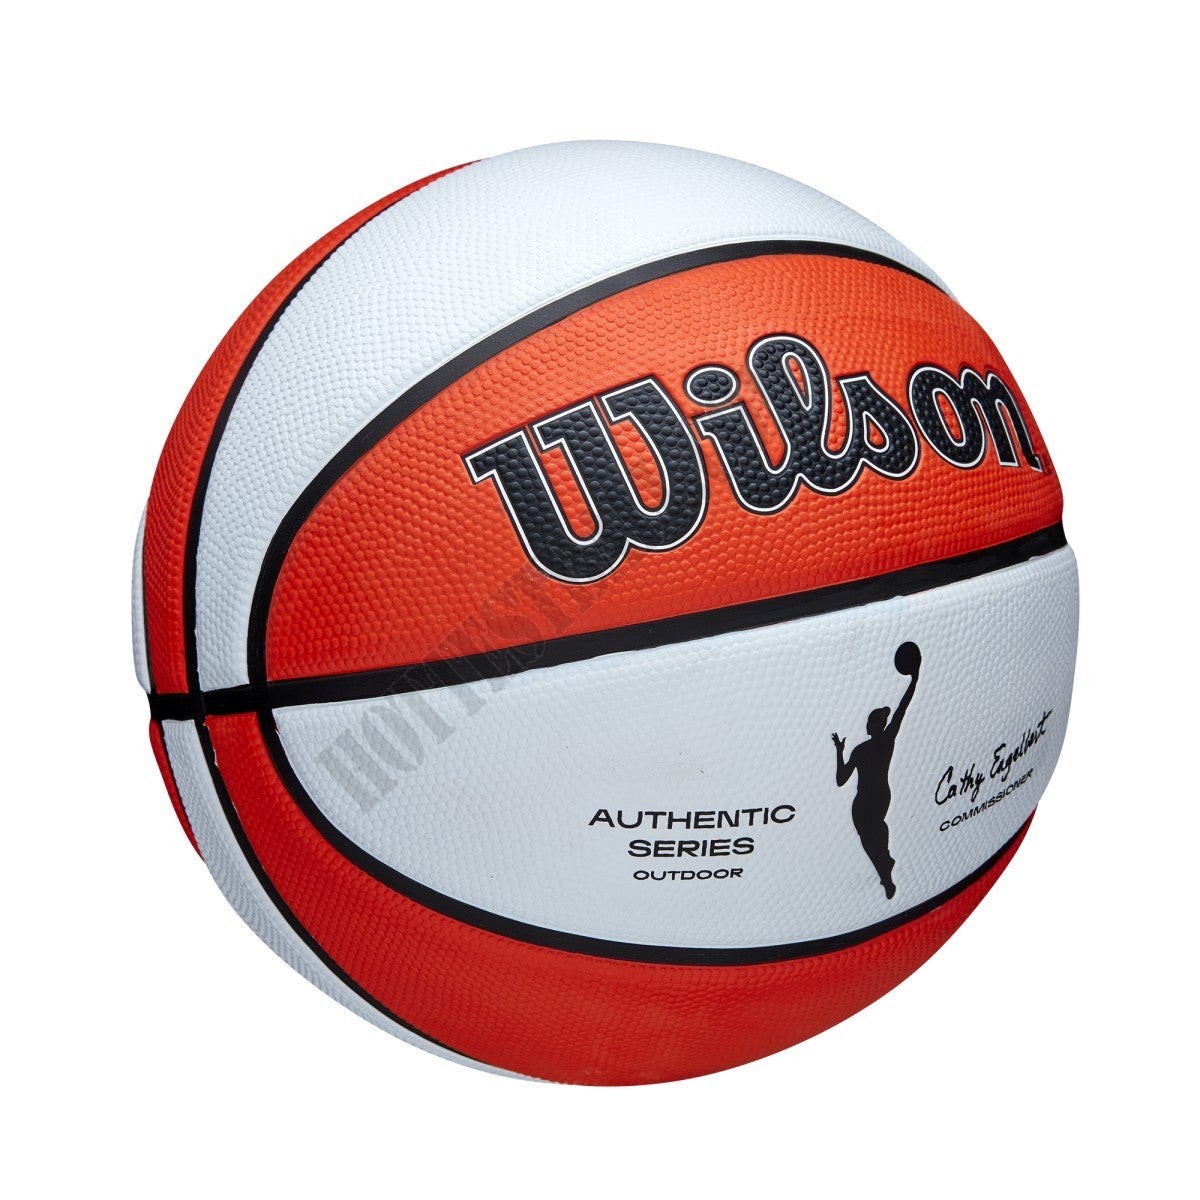 WNBA Authentic Outdoor Basketball - Wilson Discount Store - -2